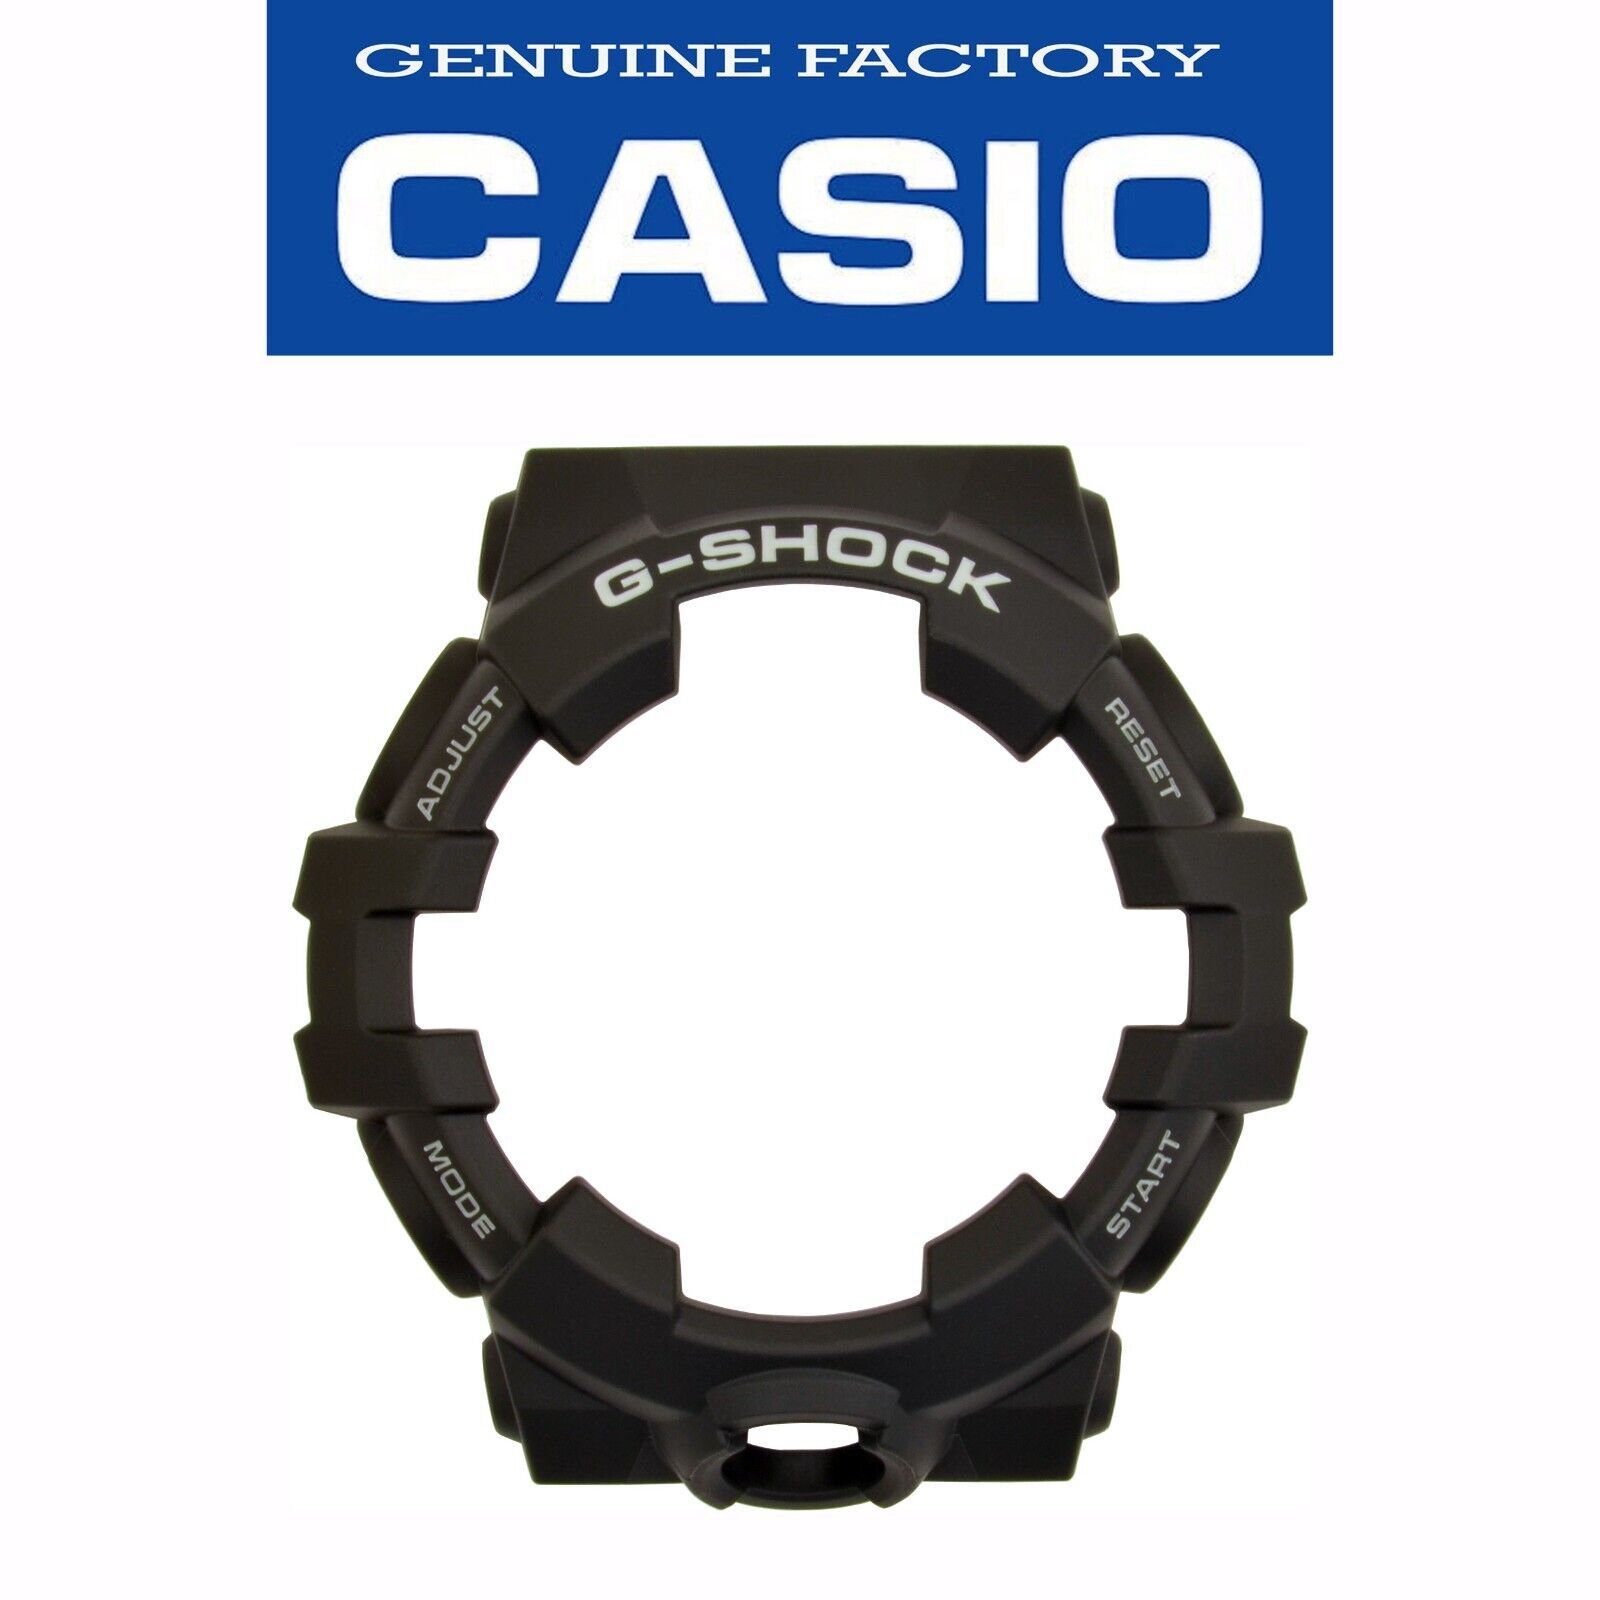 Primary image for CASIO G-SHOCK Watch Band Bezel Shell GA-700-1A Black Cover